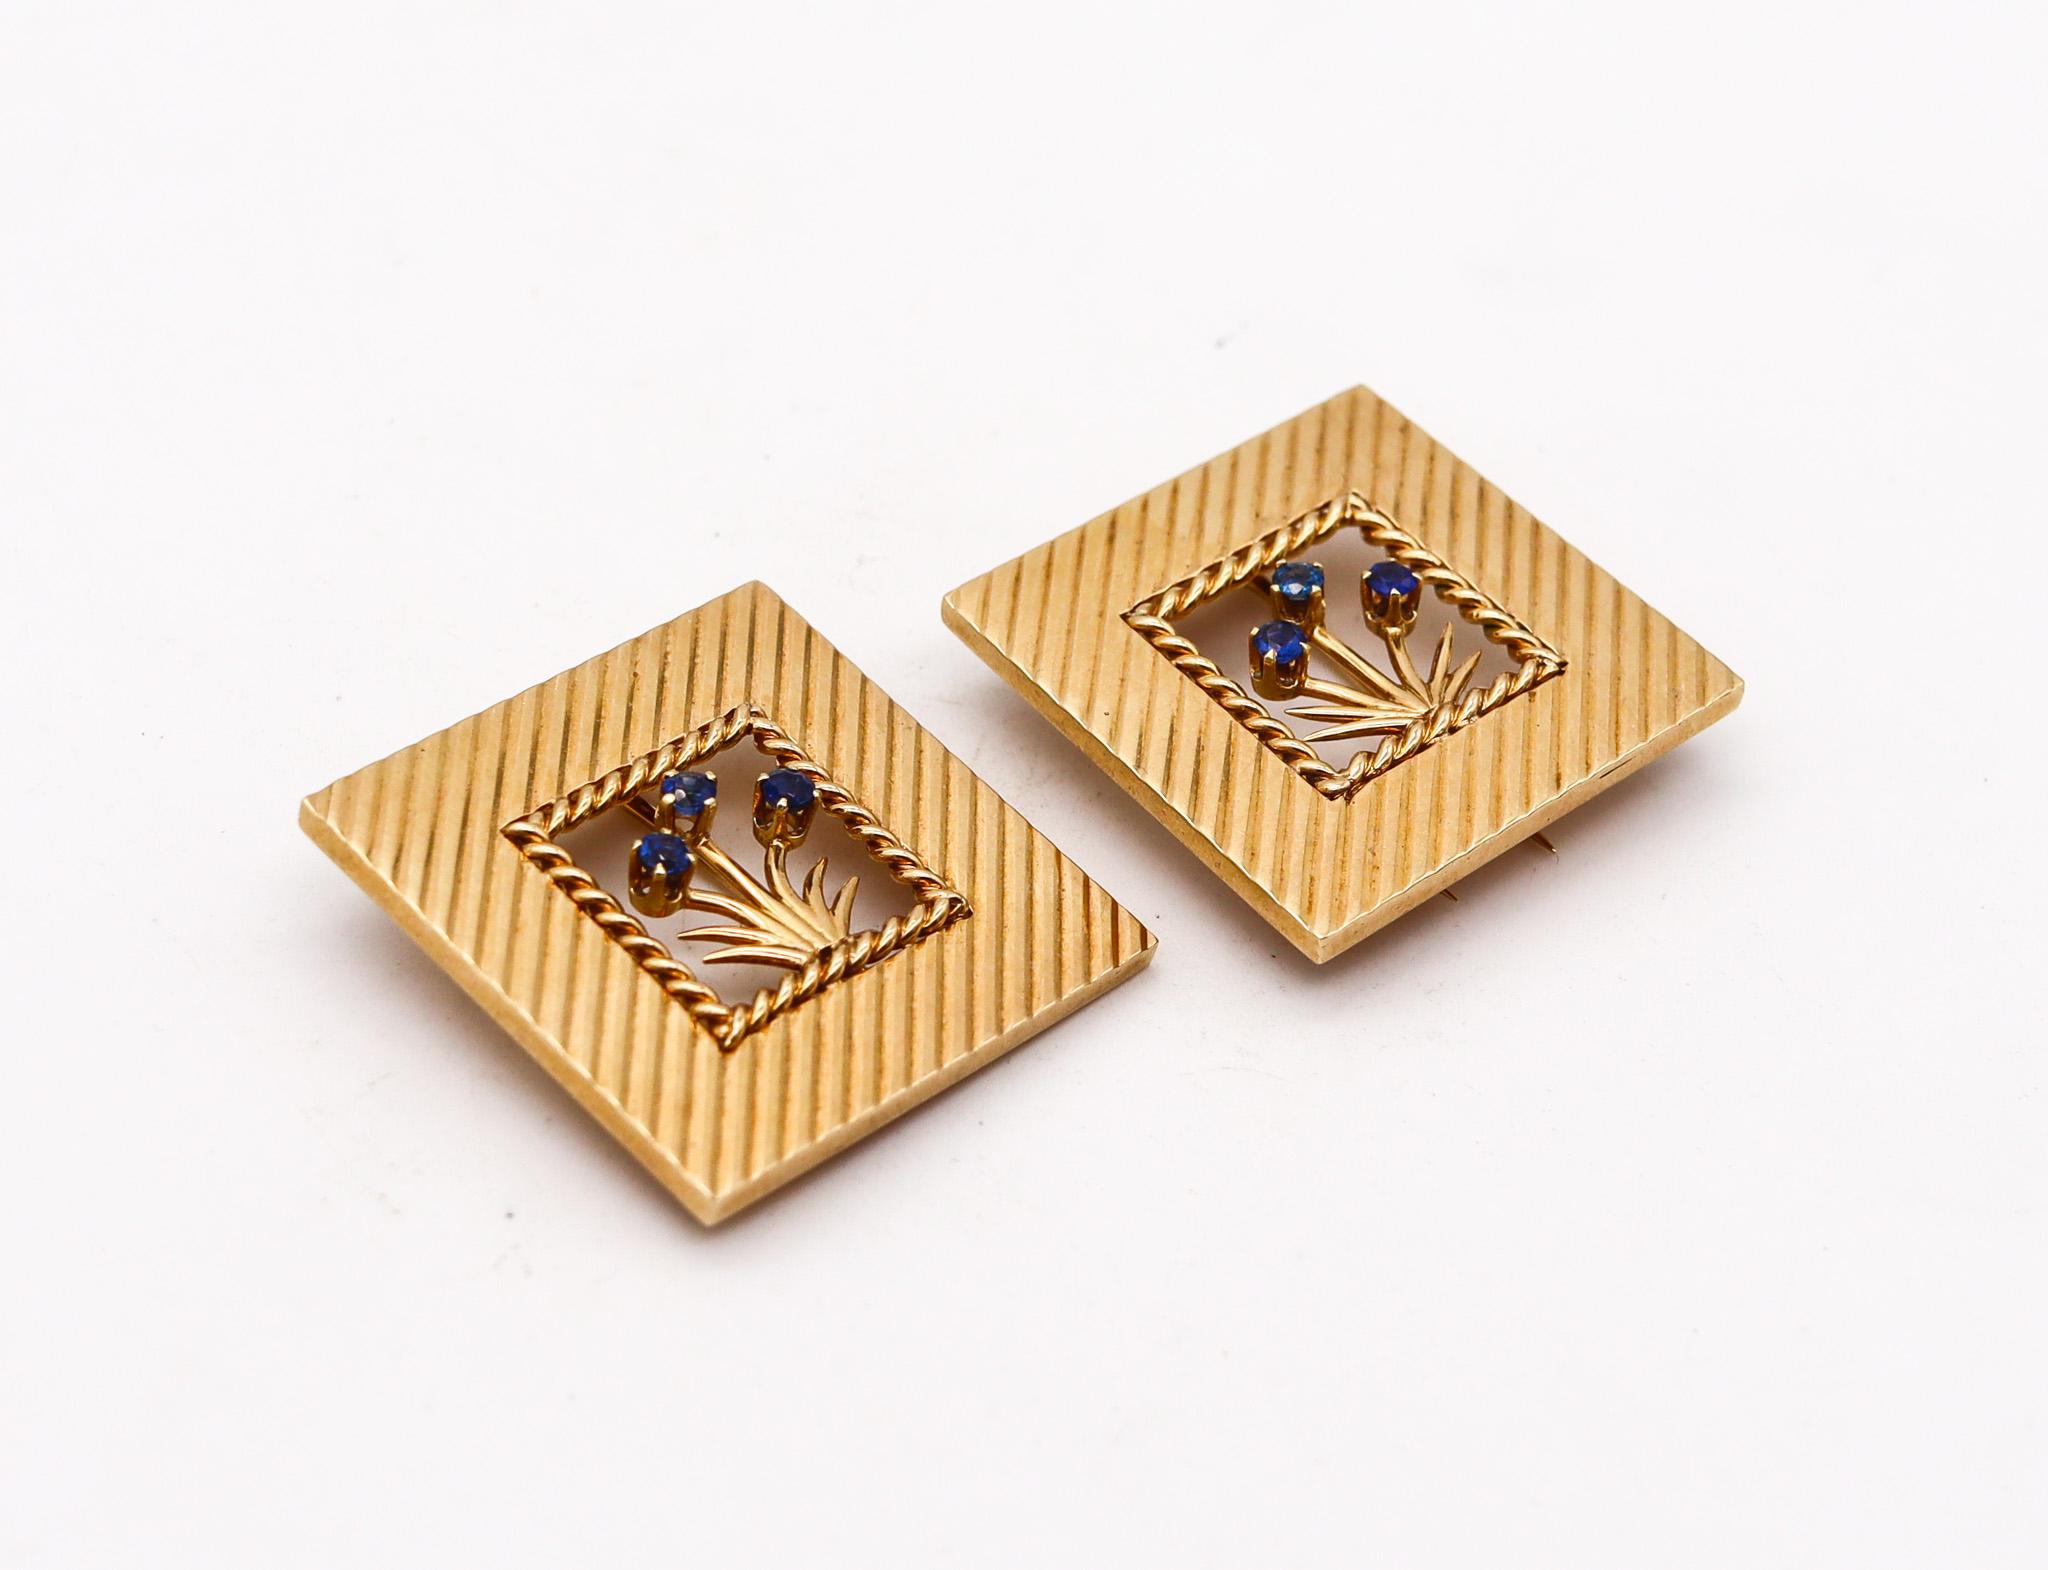 Pair of deco clips designed by Tiffany & Co. 

A beautiful pair of squared dress clips, created in New York city at the Tiffany Studios during the late art deco period, circa 1938. These dress clips has been carefully crafted with retro and